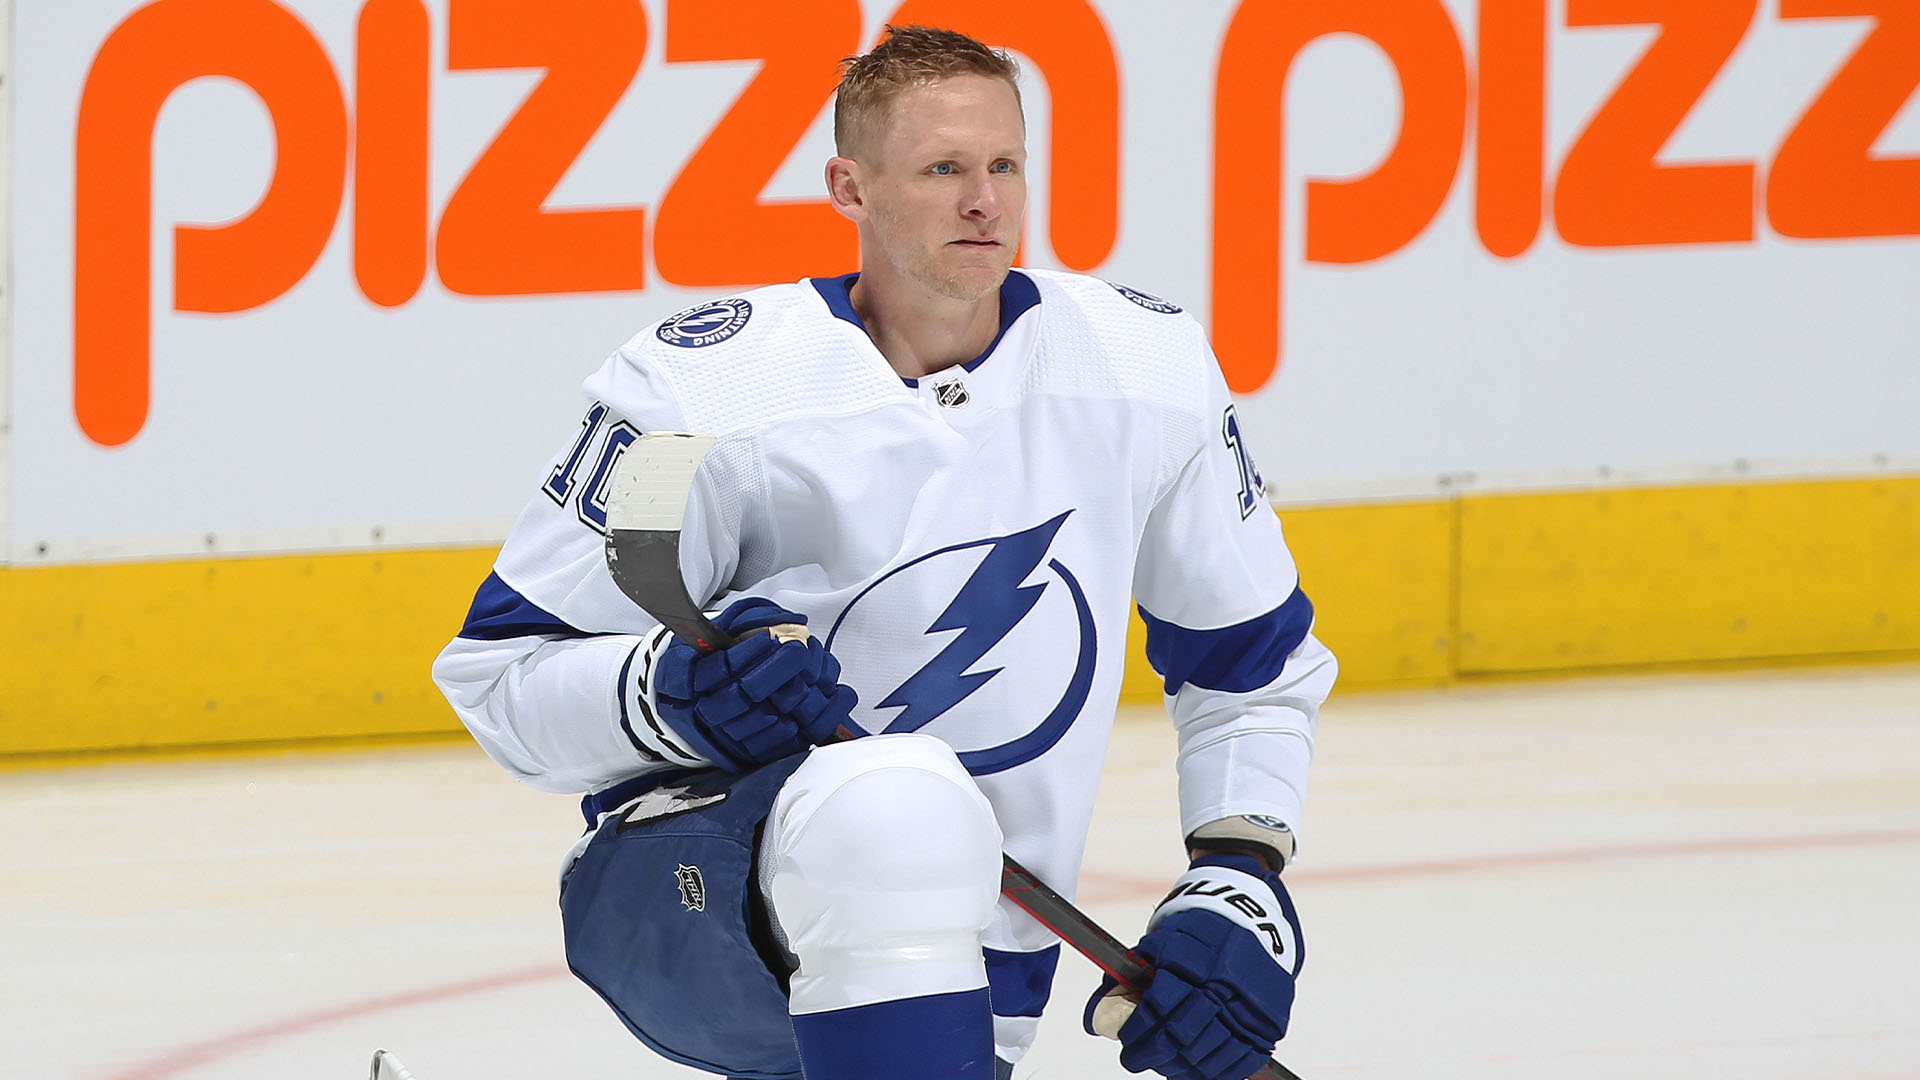 Blackhawks Acquire Forward Corey Perry from the Tampa Bay